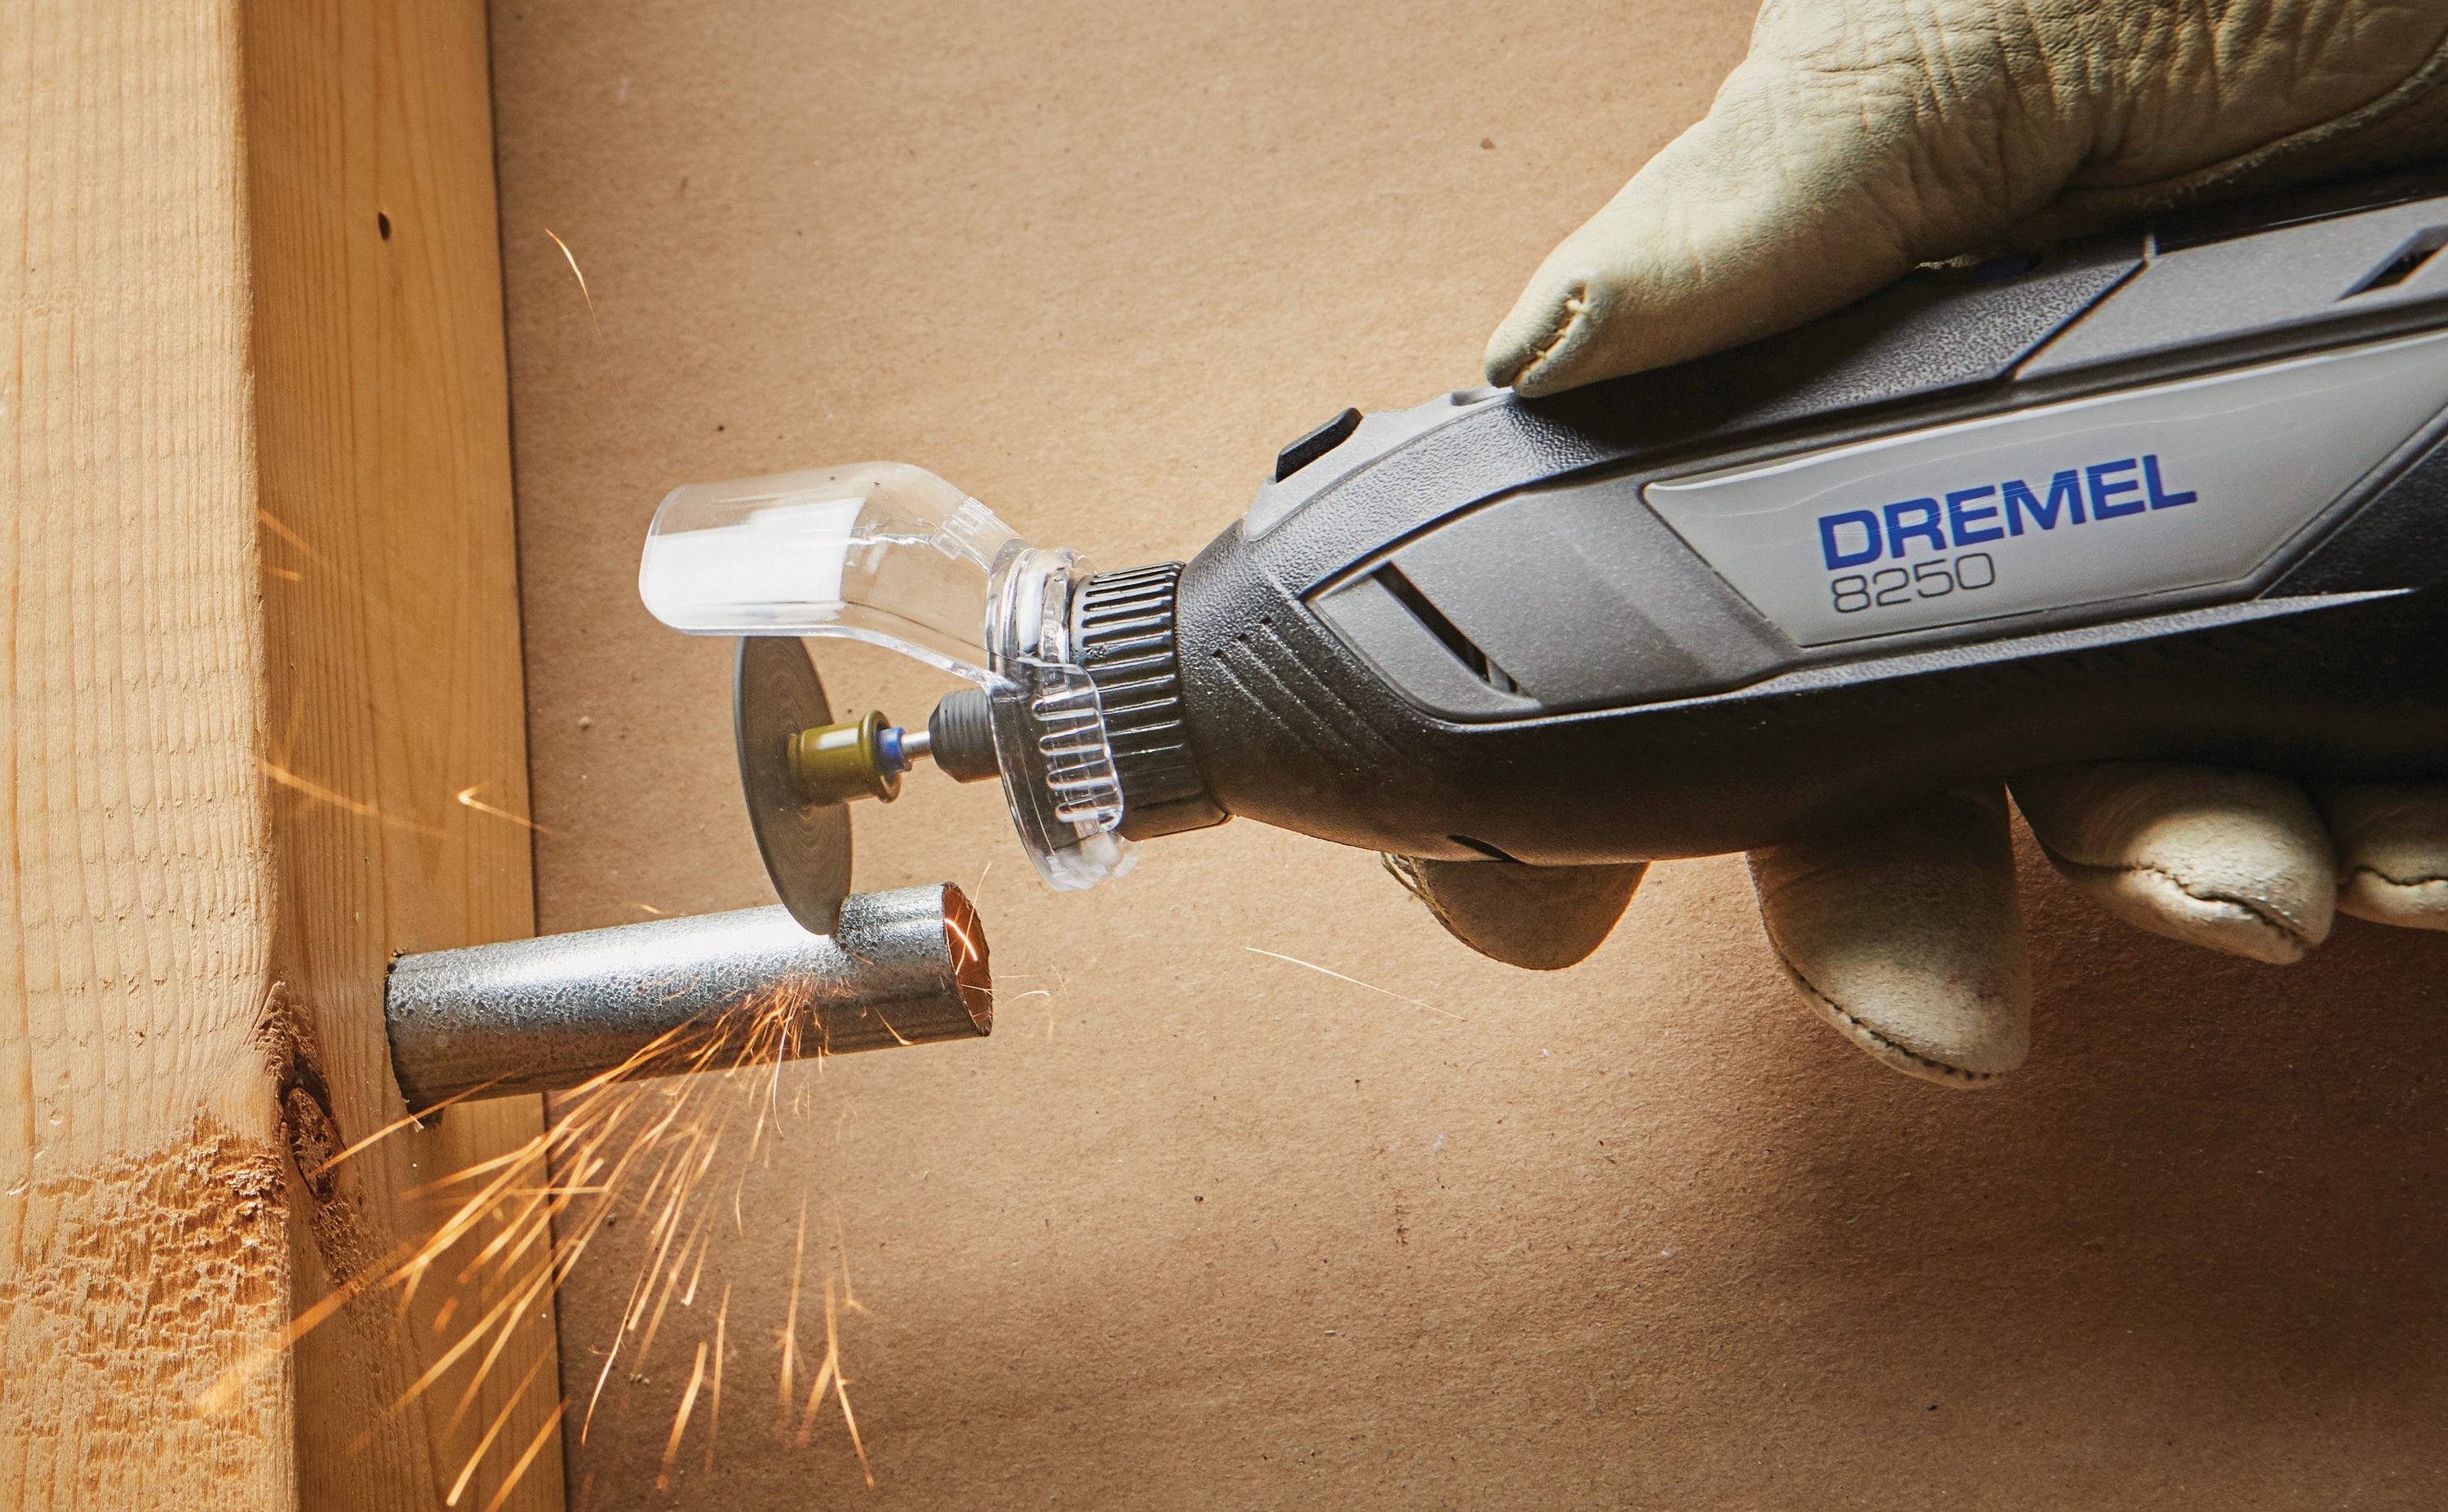 Dremel 8250 Cordless Brushless Rotary Tool Kit and 225 Flex Shaft Rotary  Tool Attachment 